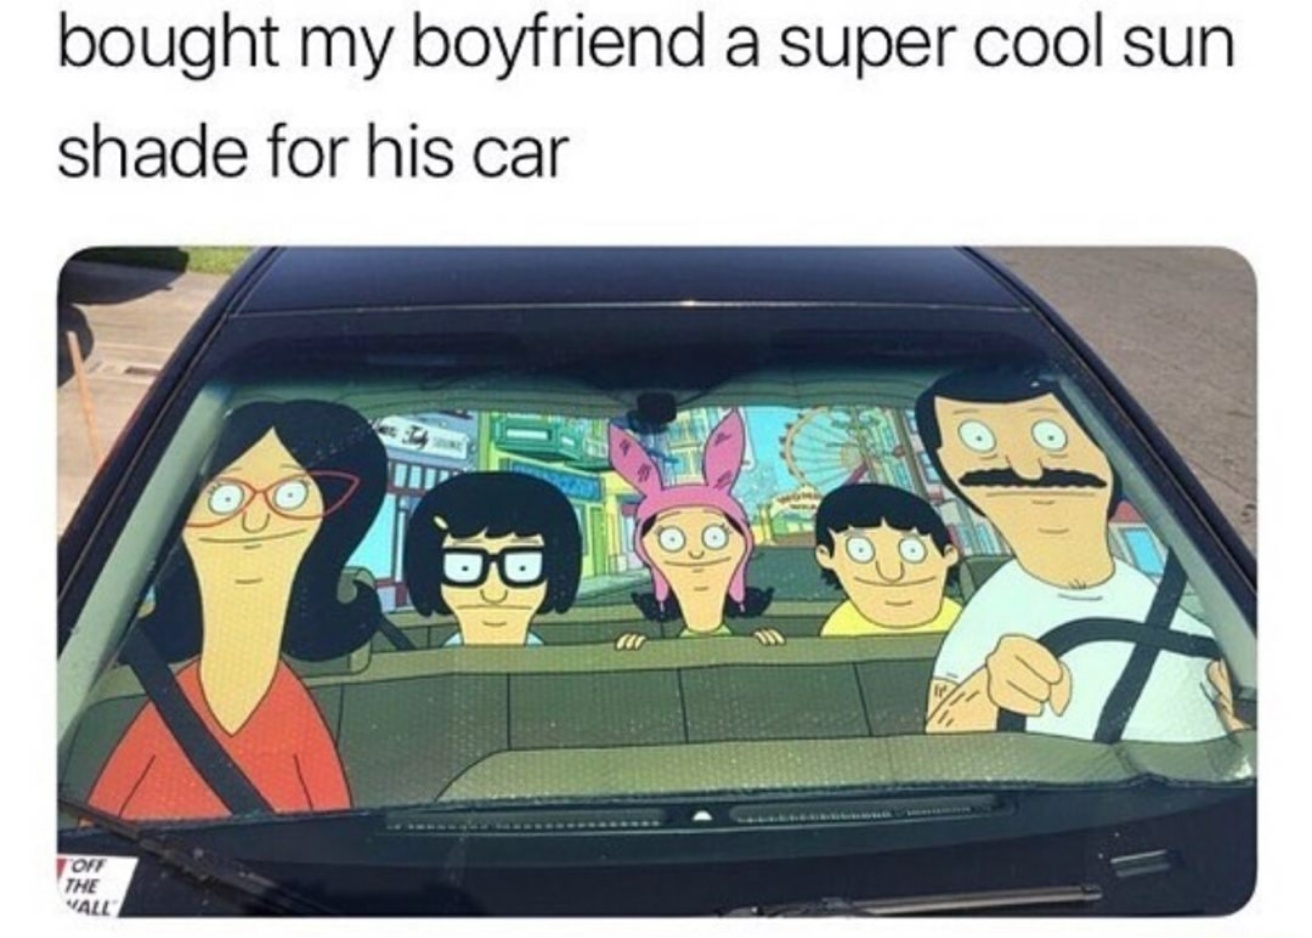 meme - bob's burgers quotes - bought my boyfriend a super cool sun shade for his car Tort The Vall